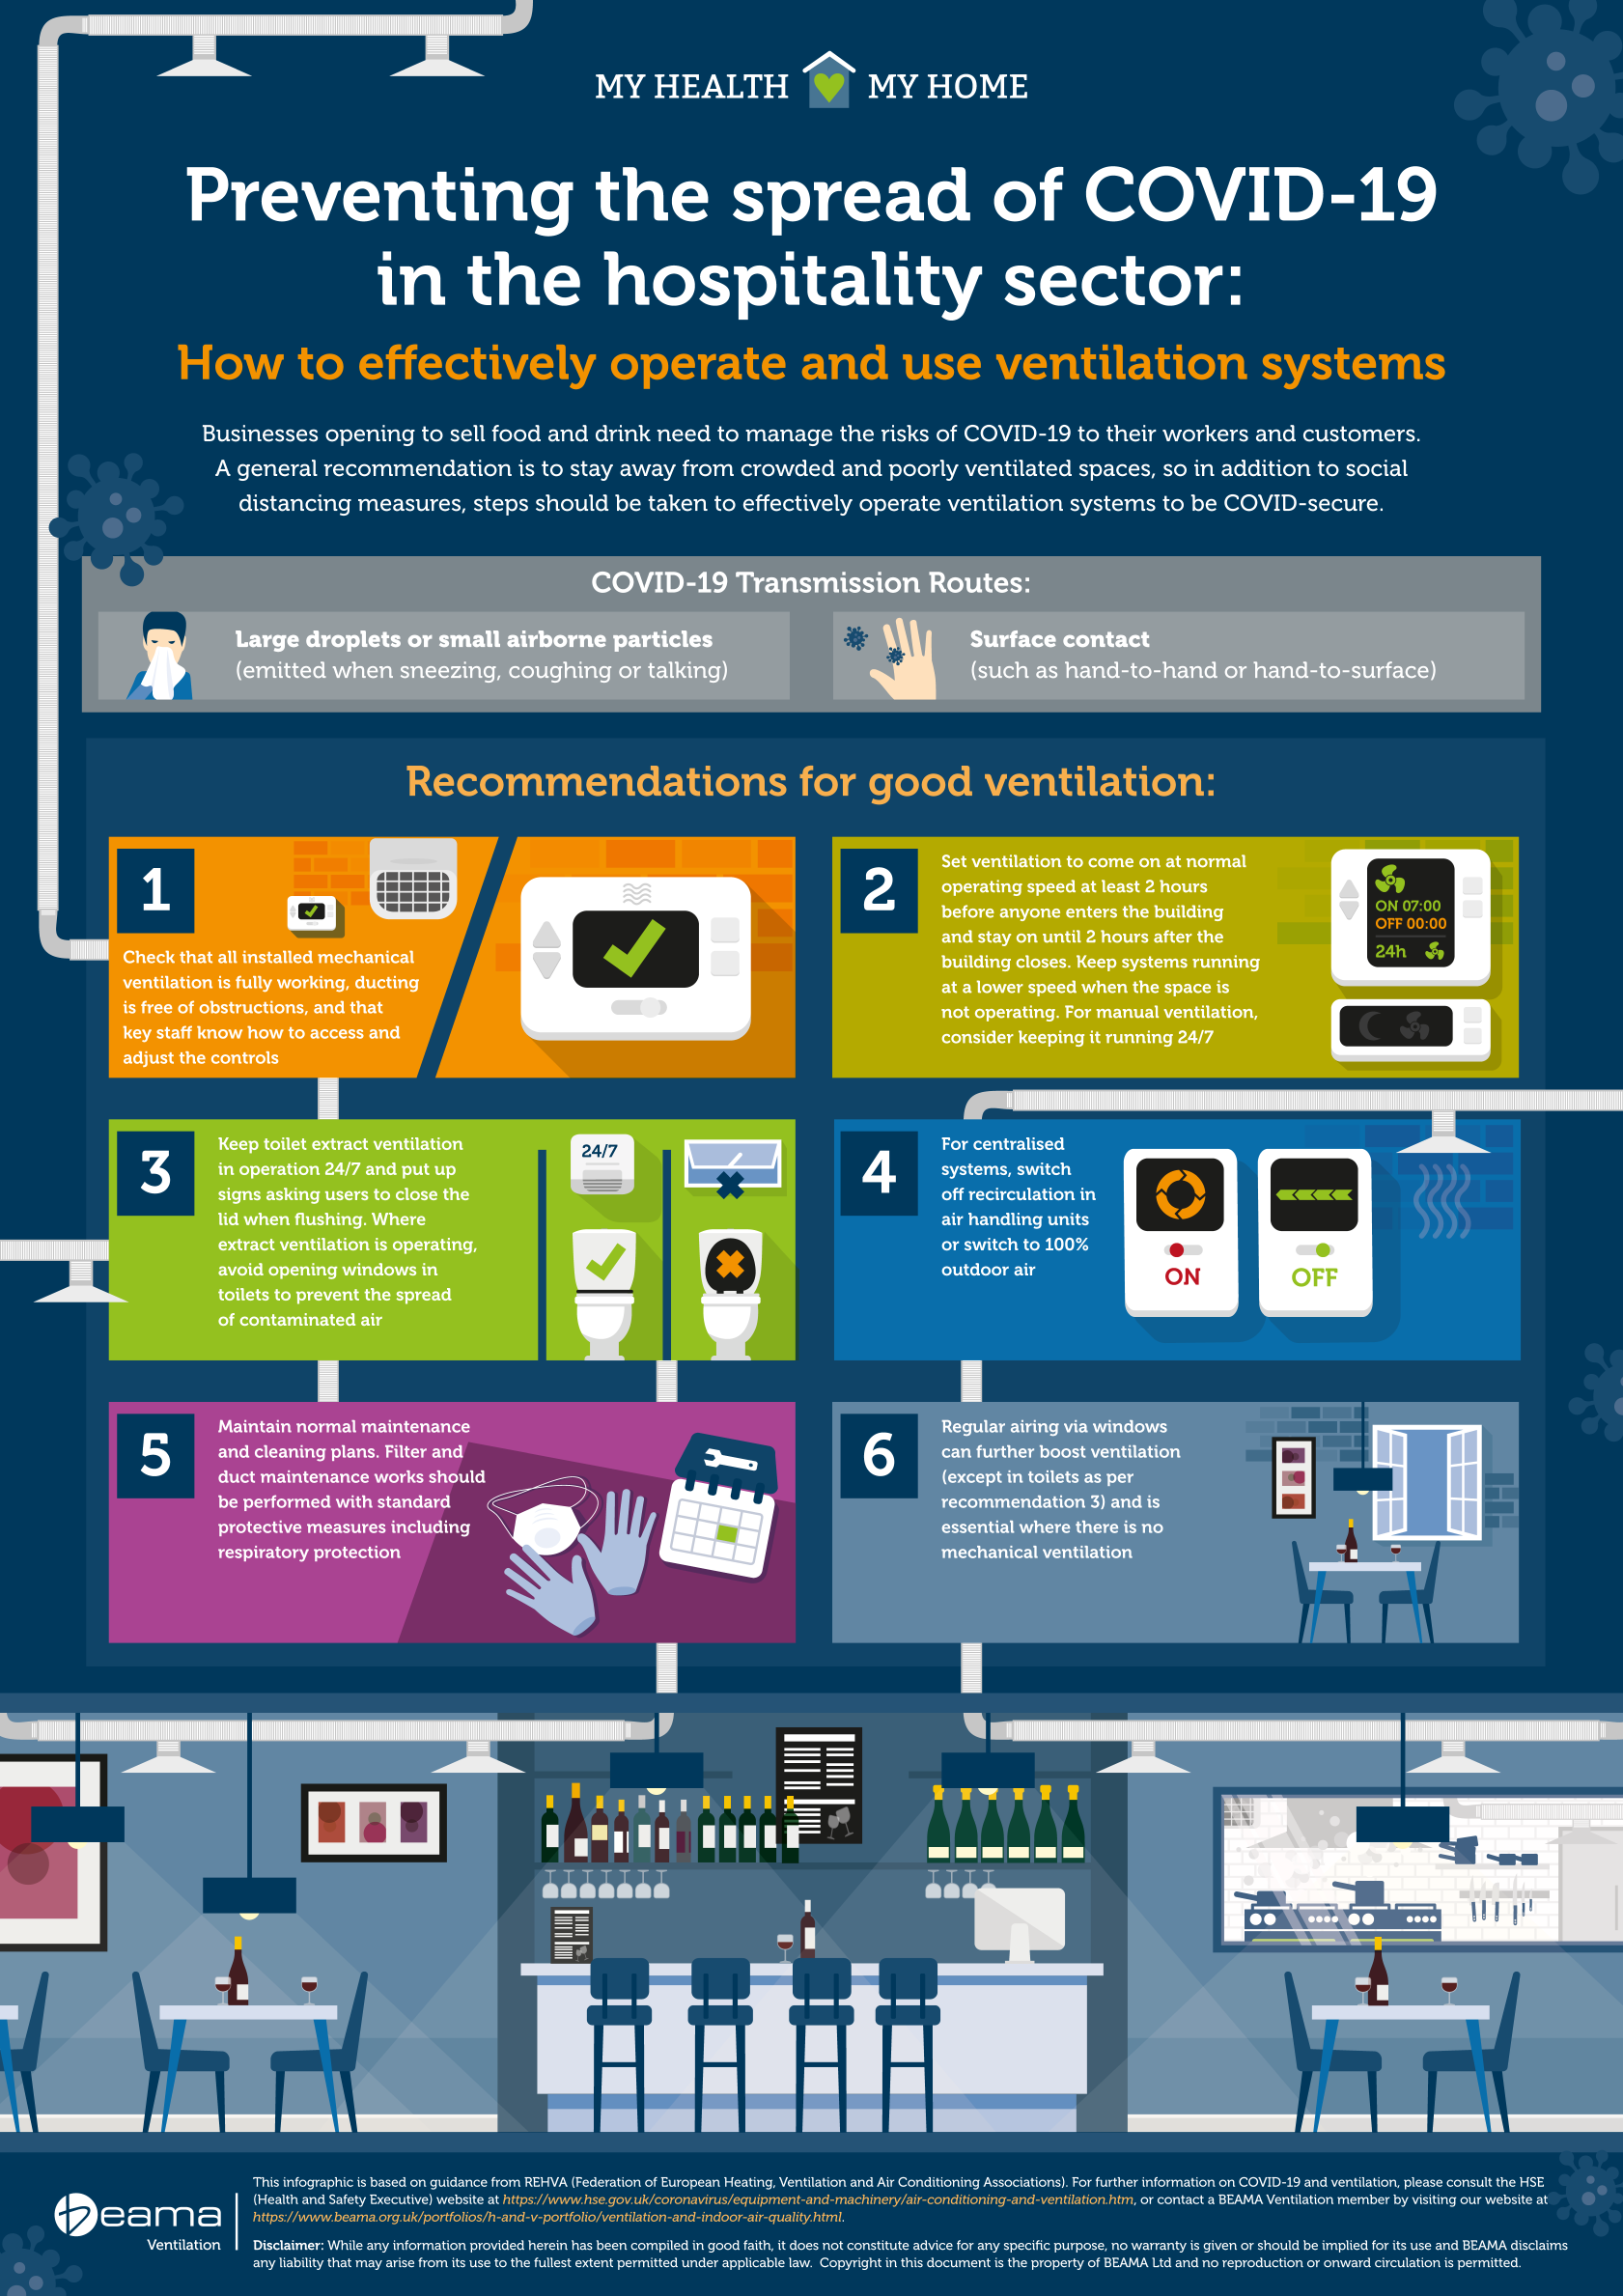 BEAMA COVID-19 Ventilation Guidance Infographic (Hospitality) FINAL v.2.png